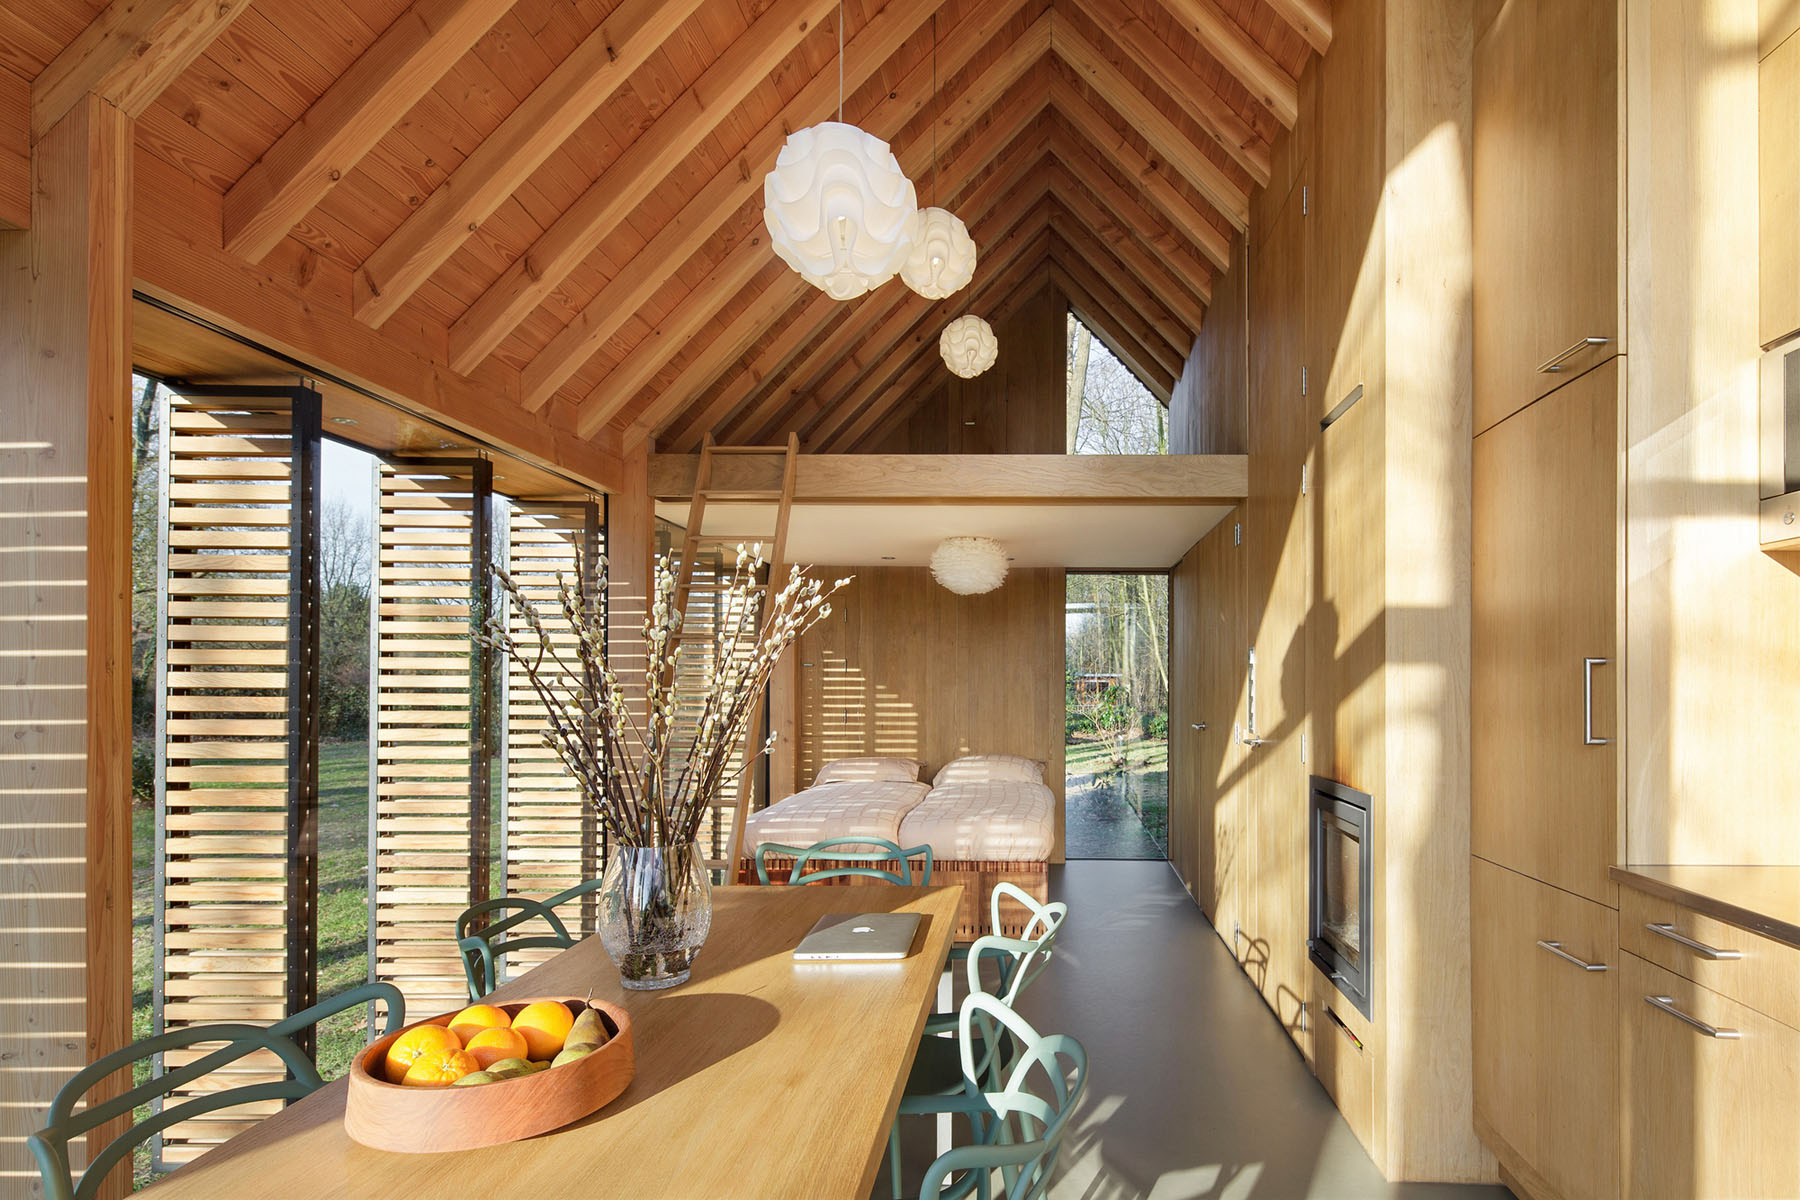 Interior of Tiny Wood Country House